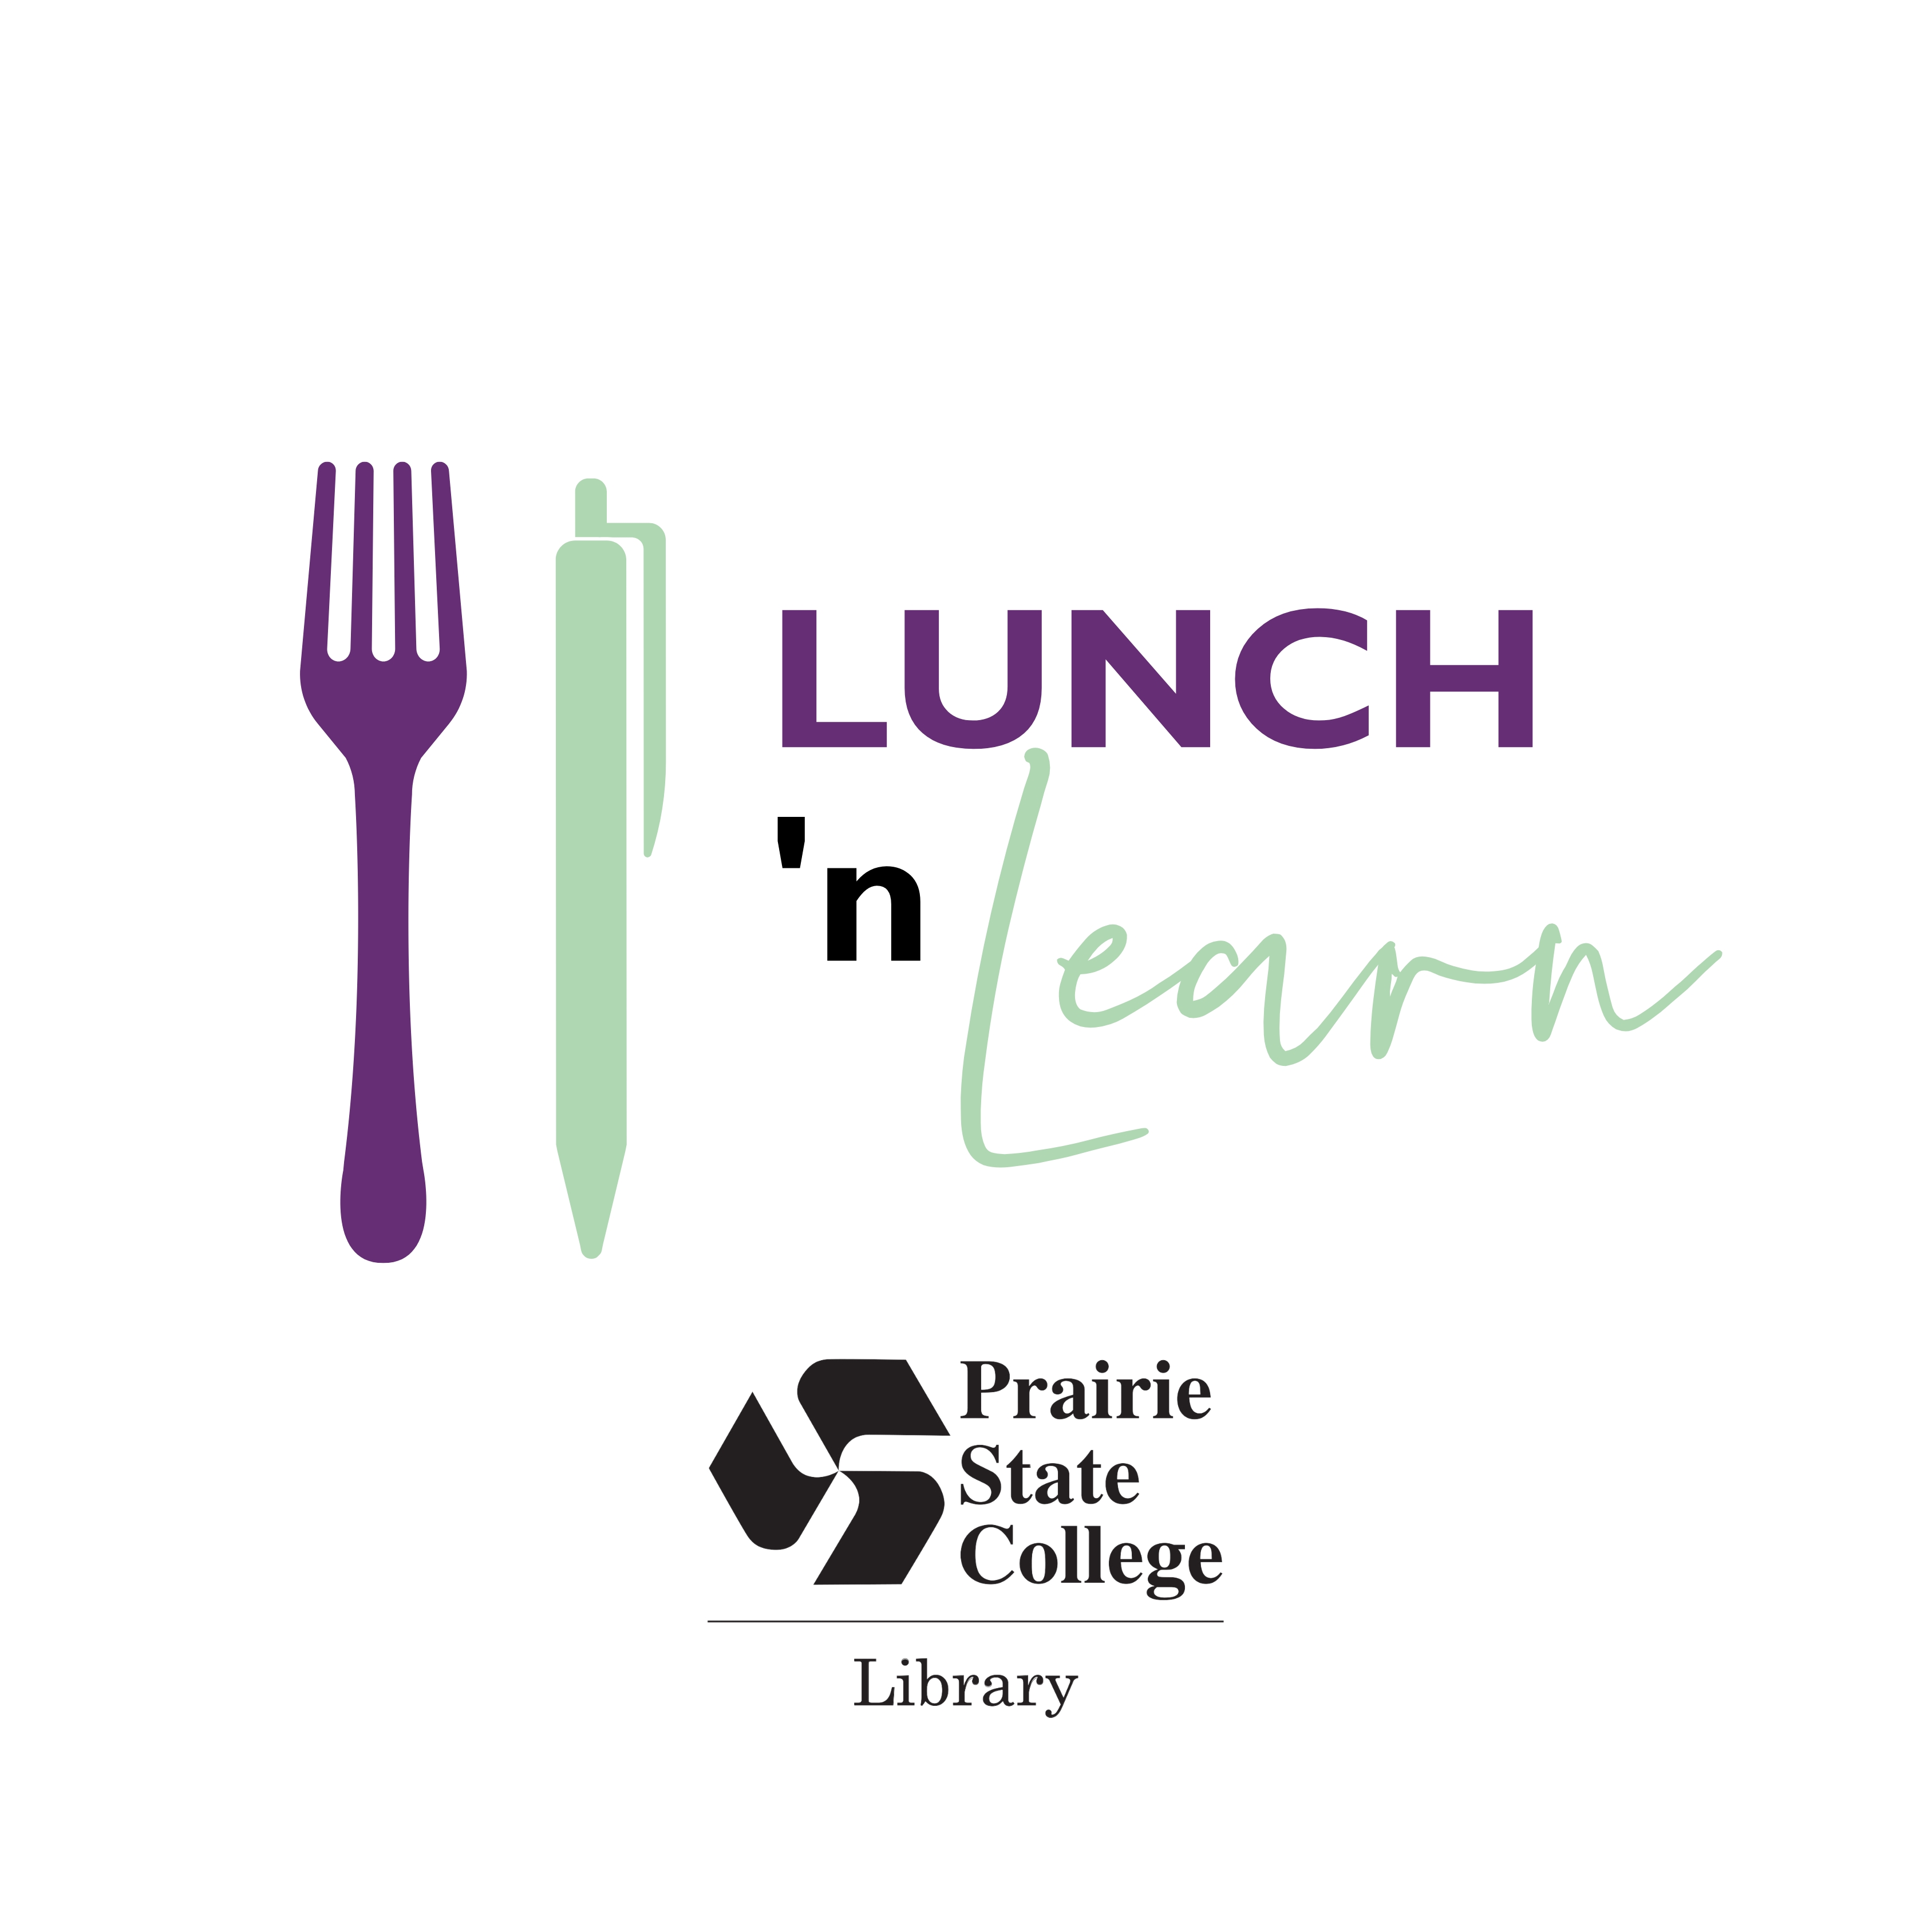 image for Lunch 'n Learn which includes a fork, pen, and the PSC logo